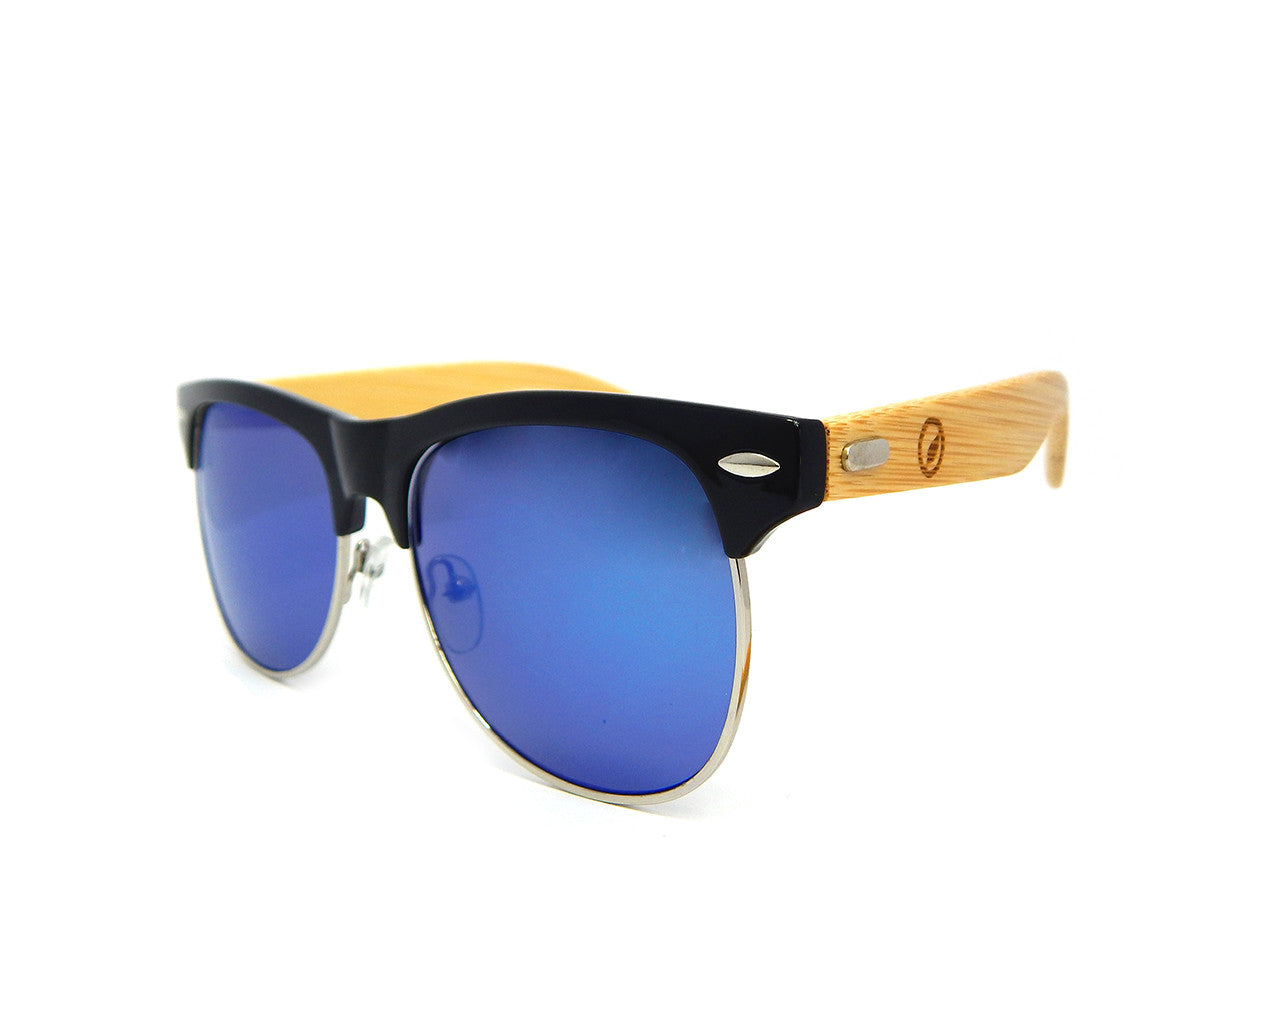 Bamboo Sunglasses Blue Mirror BSC03 - Natural Clothes Bamboo Clothing & Accessories for Men & Women 